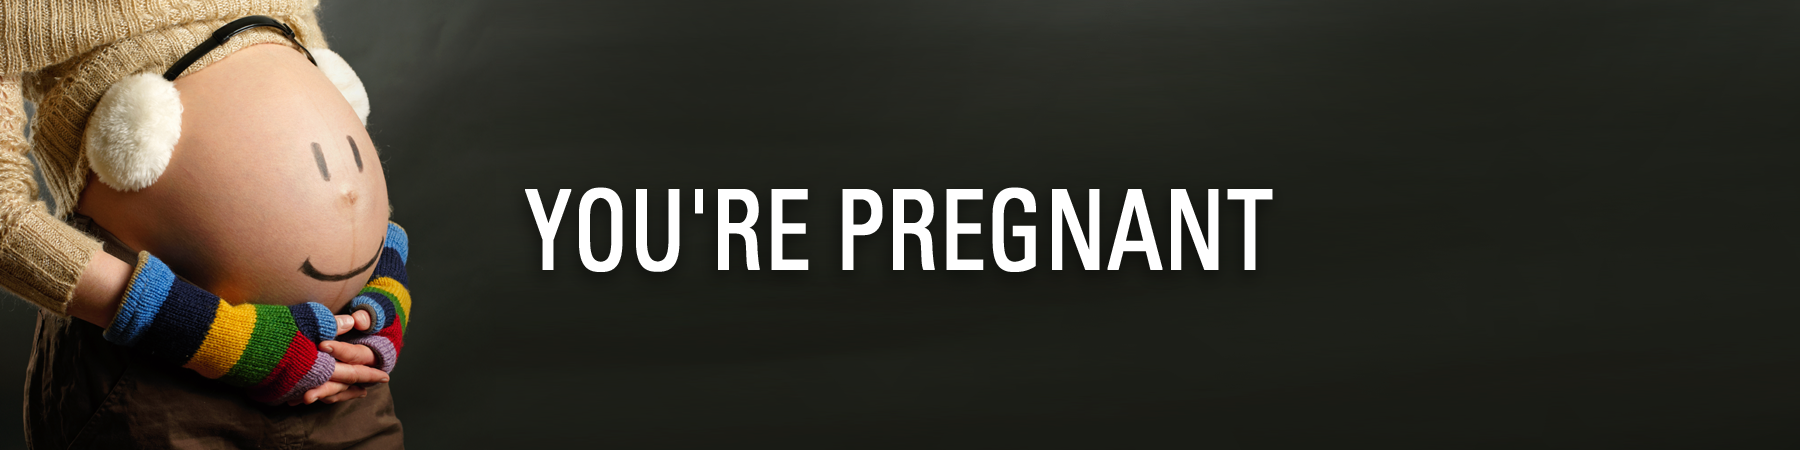 YOU'RE PREGNANT